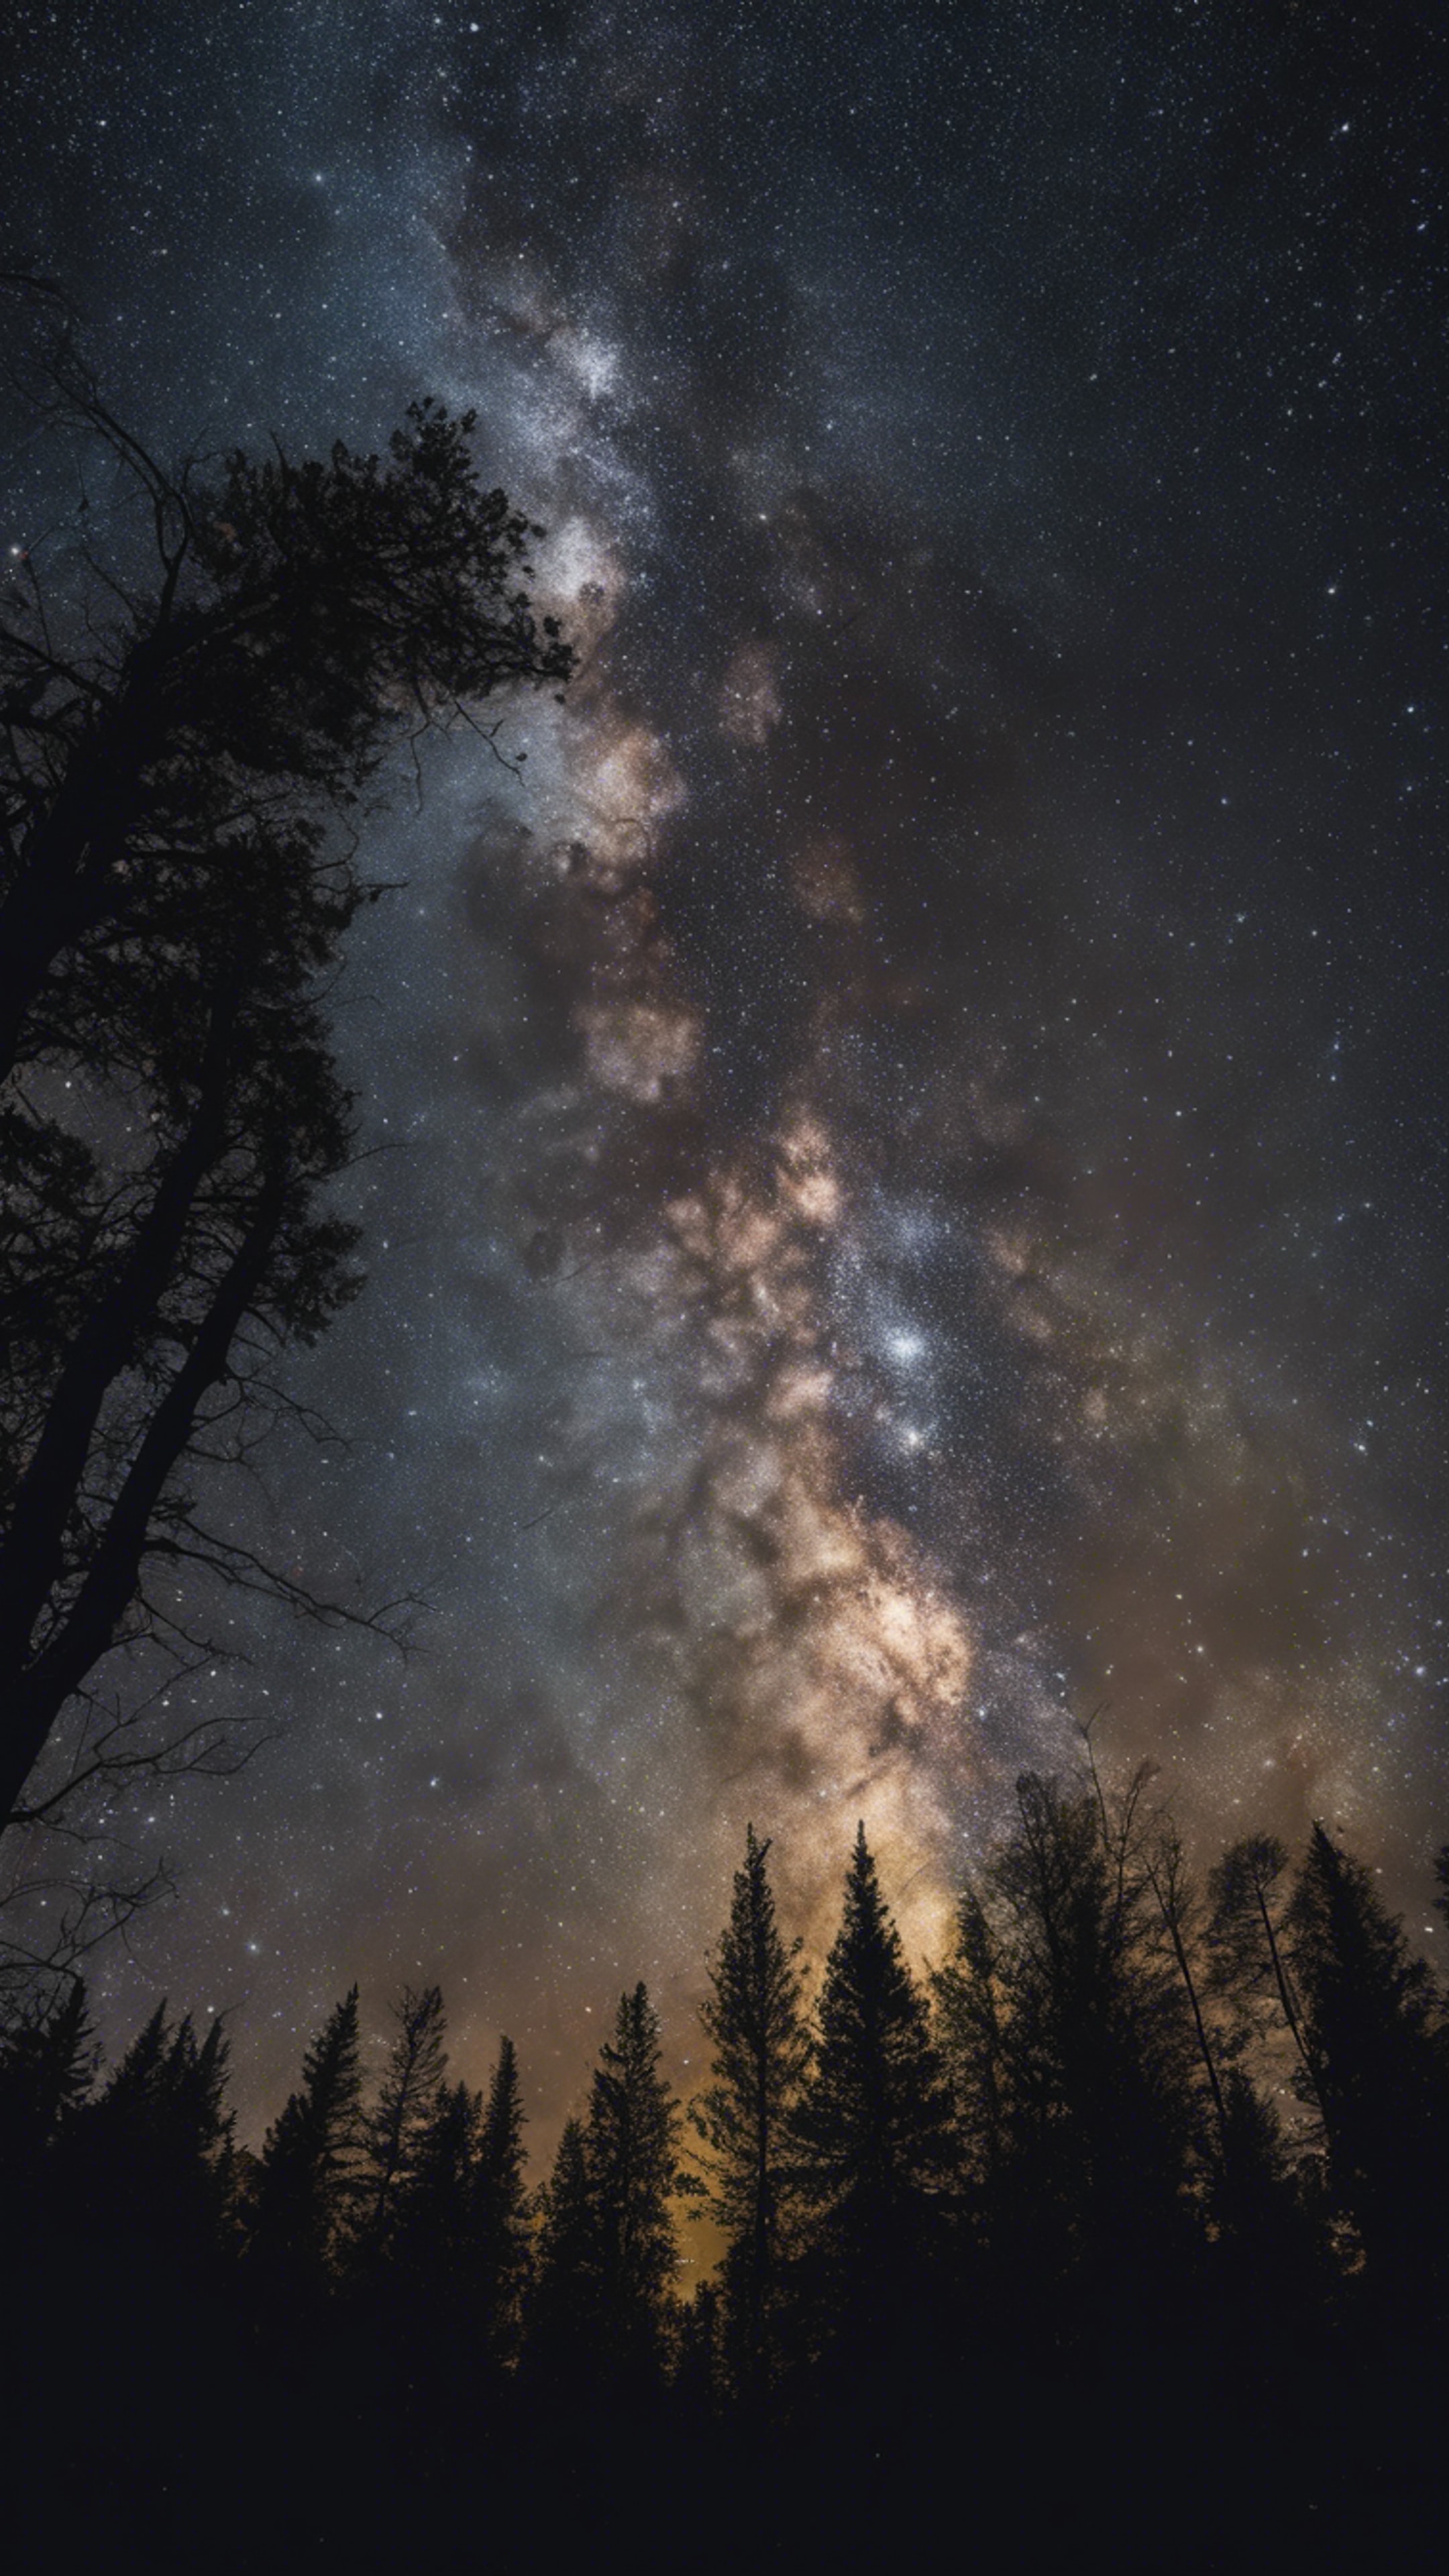 An astrophotograph showcasing the radiant Milky Way, against the contrast of a dark forest silhouette. Tapeta[89bcc876a6704e52b700]